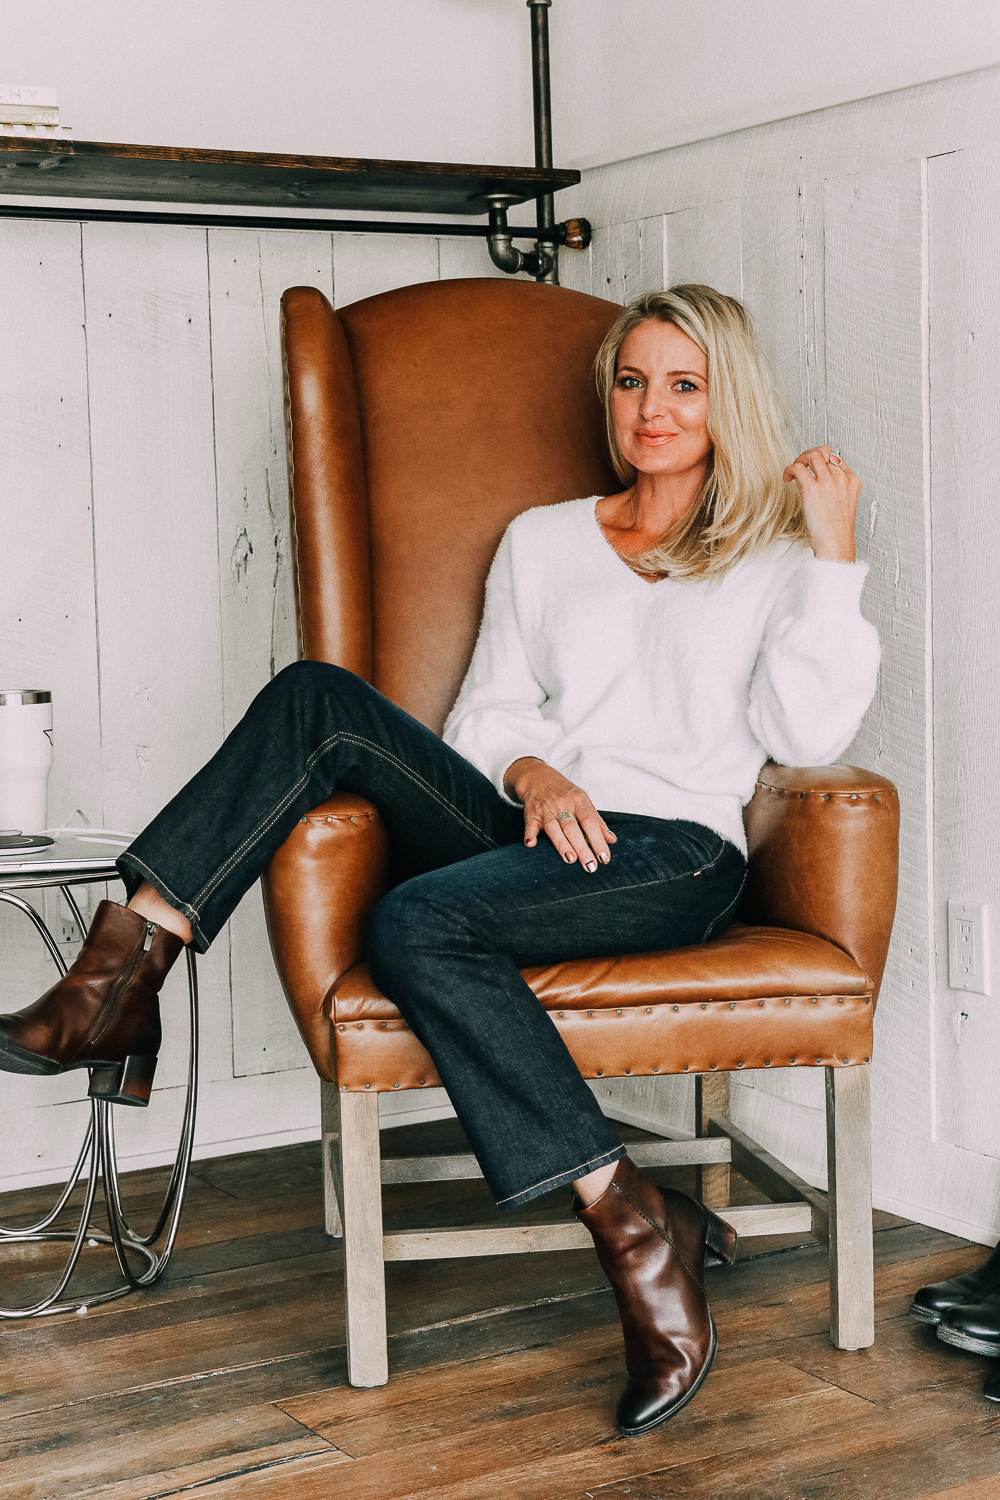 November Favorites, Fashion blogger Erin Busbee of BusbeeStyle.com wearing a white fuzzy v-neck sweater by Halogen with dark wash kick flare jeans and brown Ecco booties sitting in her studio in Telluride, CO